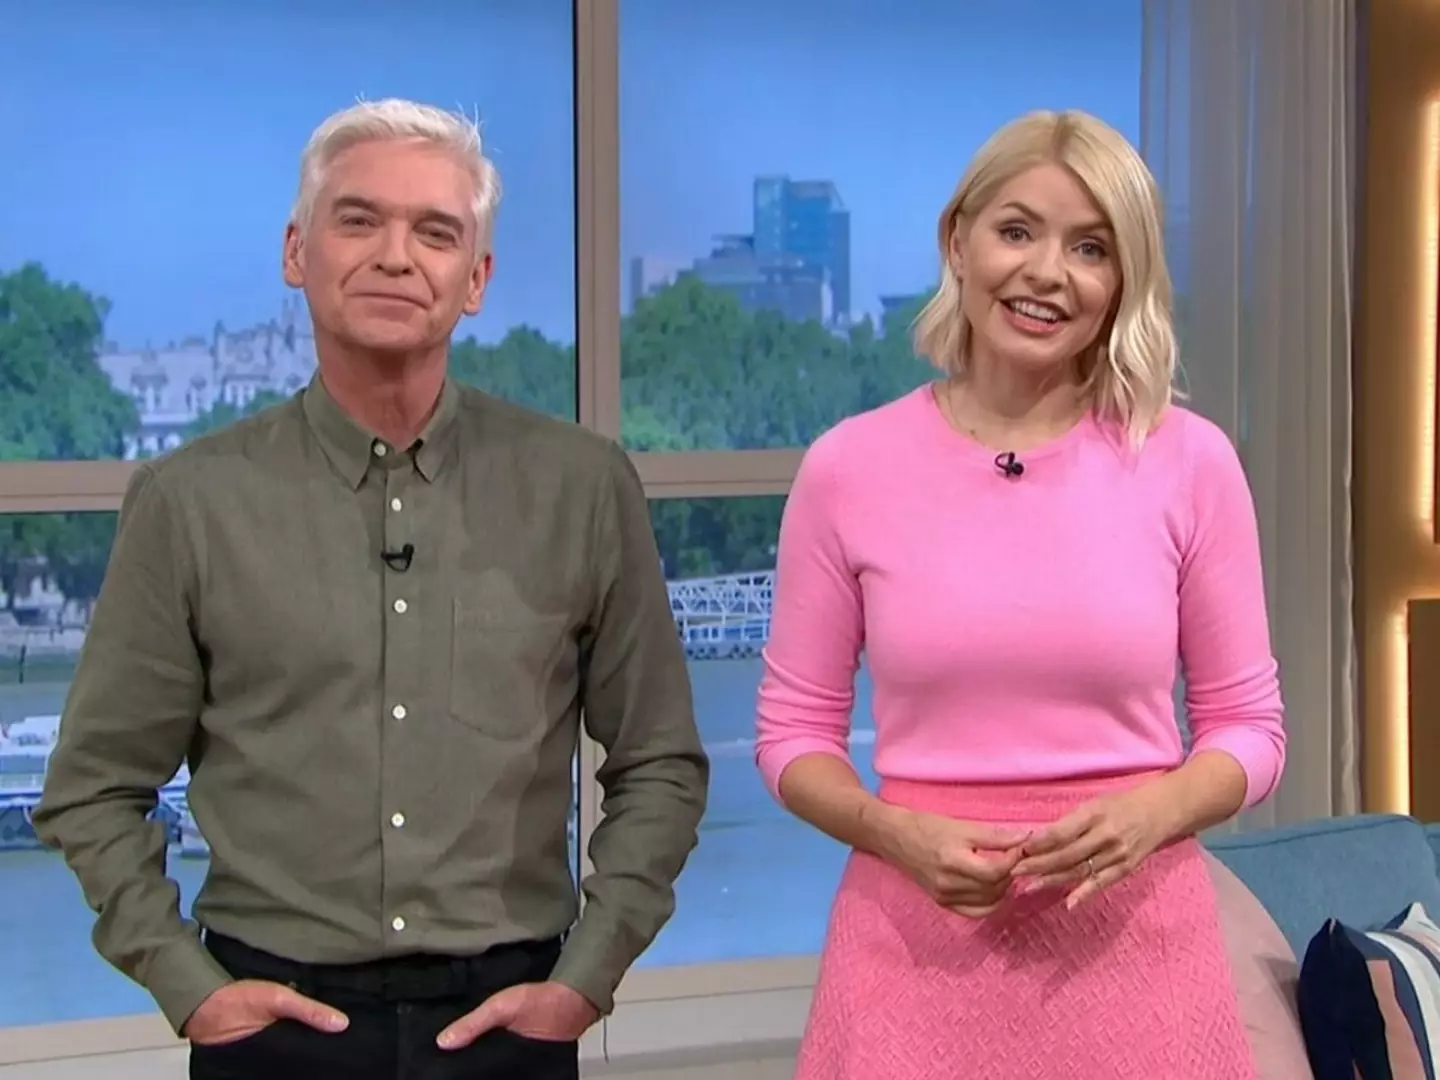 Phillip Schofield and Holly Willoughby presented the show together since 2009.